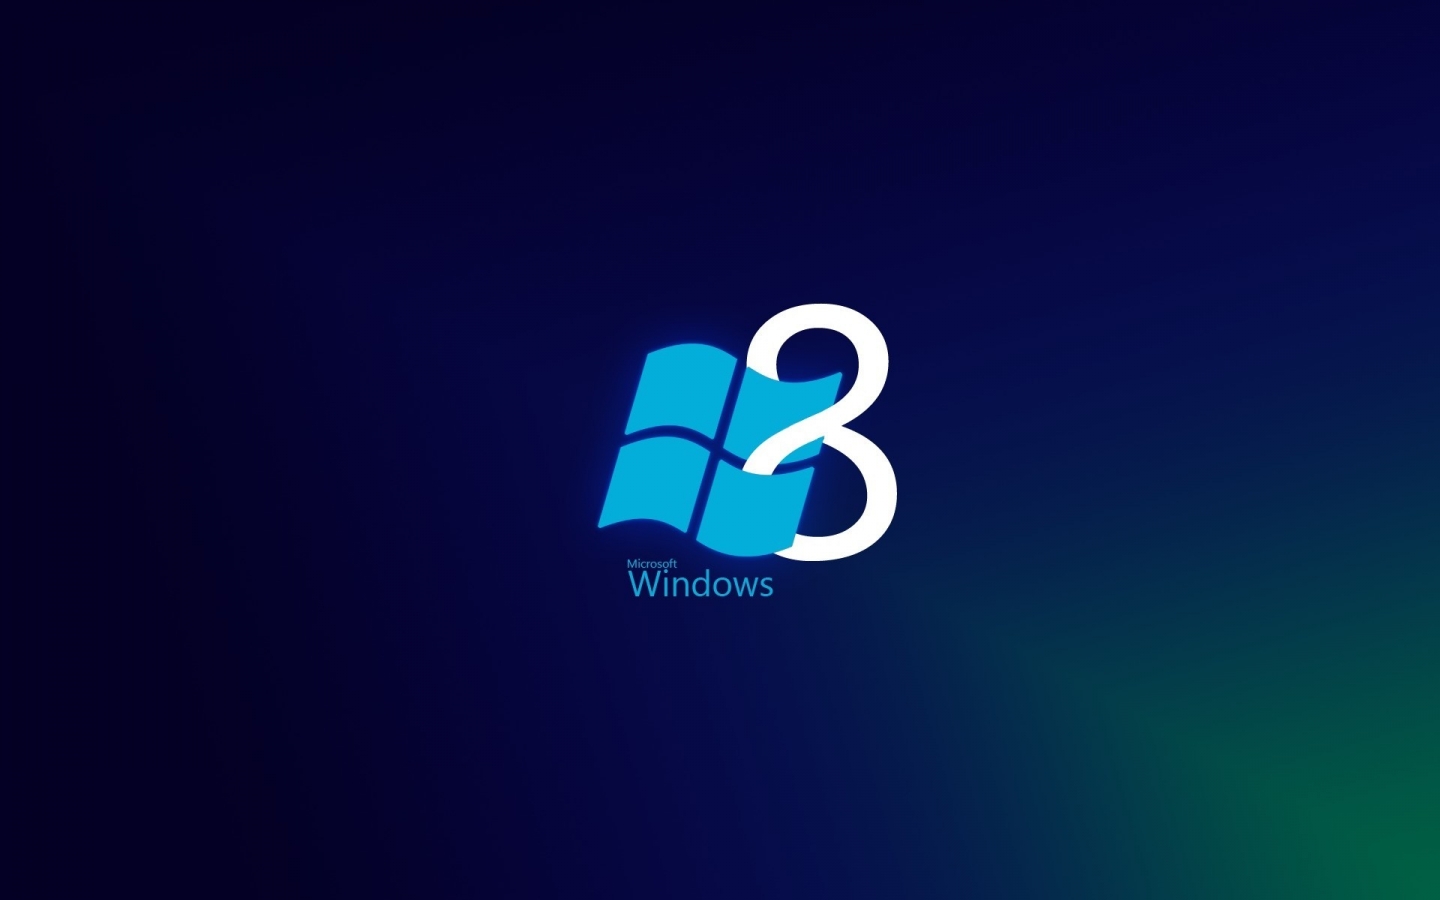 Windows 8 Blue Style for 1440 x 900 widescreen resolution